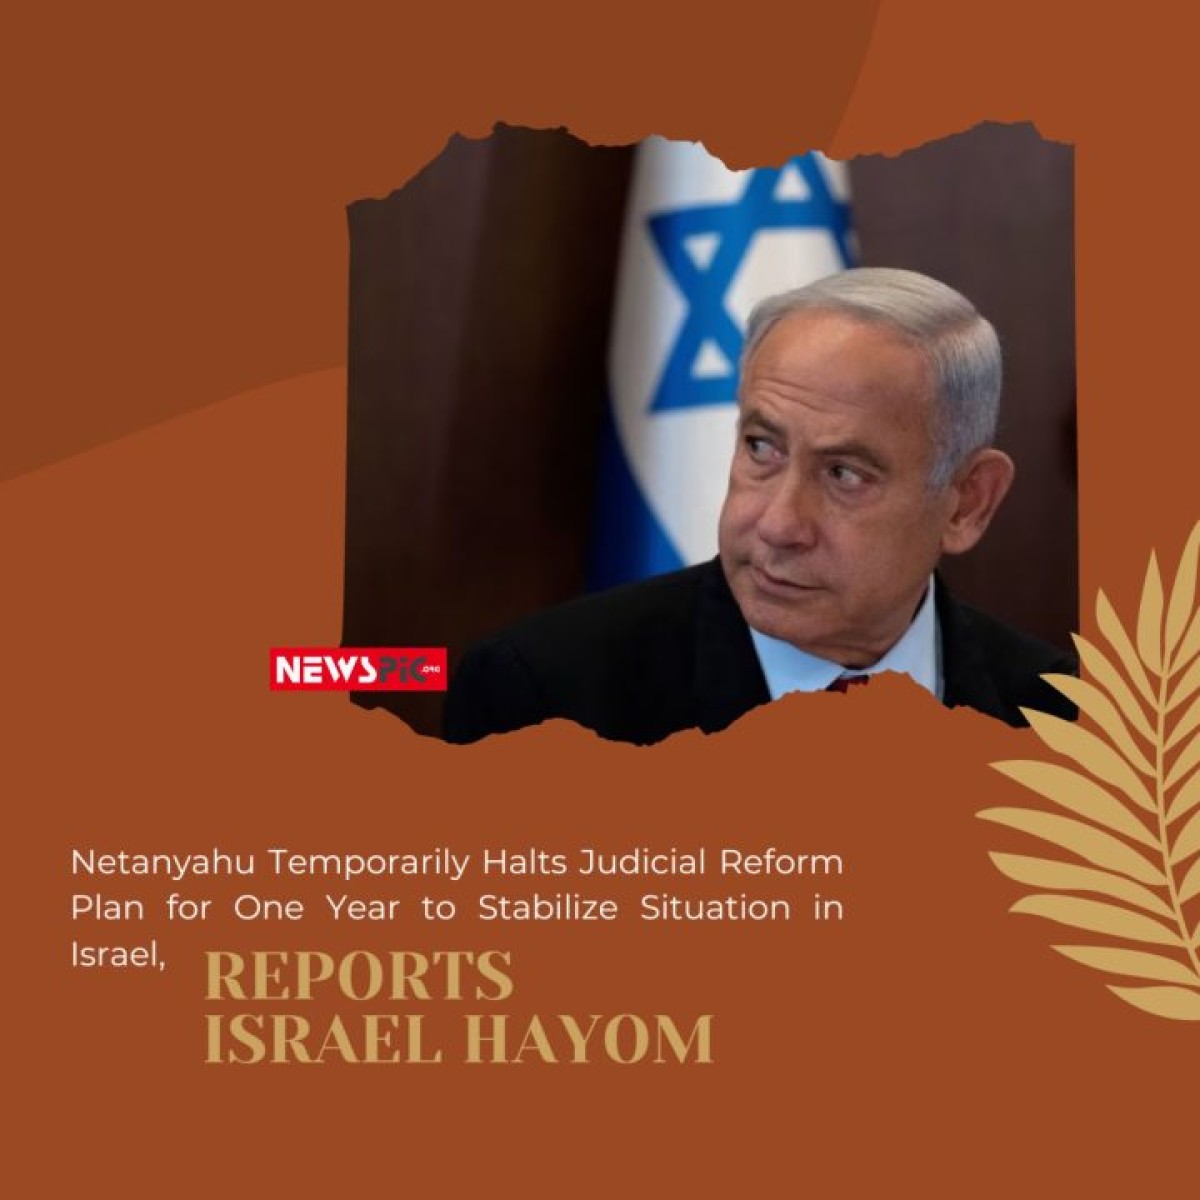 Netanyahu Temporarily Halts Judicial Reform Plan for One Year to Stabilize Situation in Israel, Reports Israel Hayom